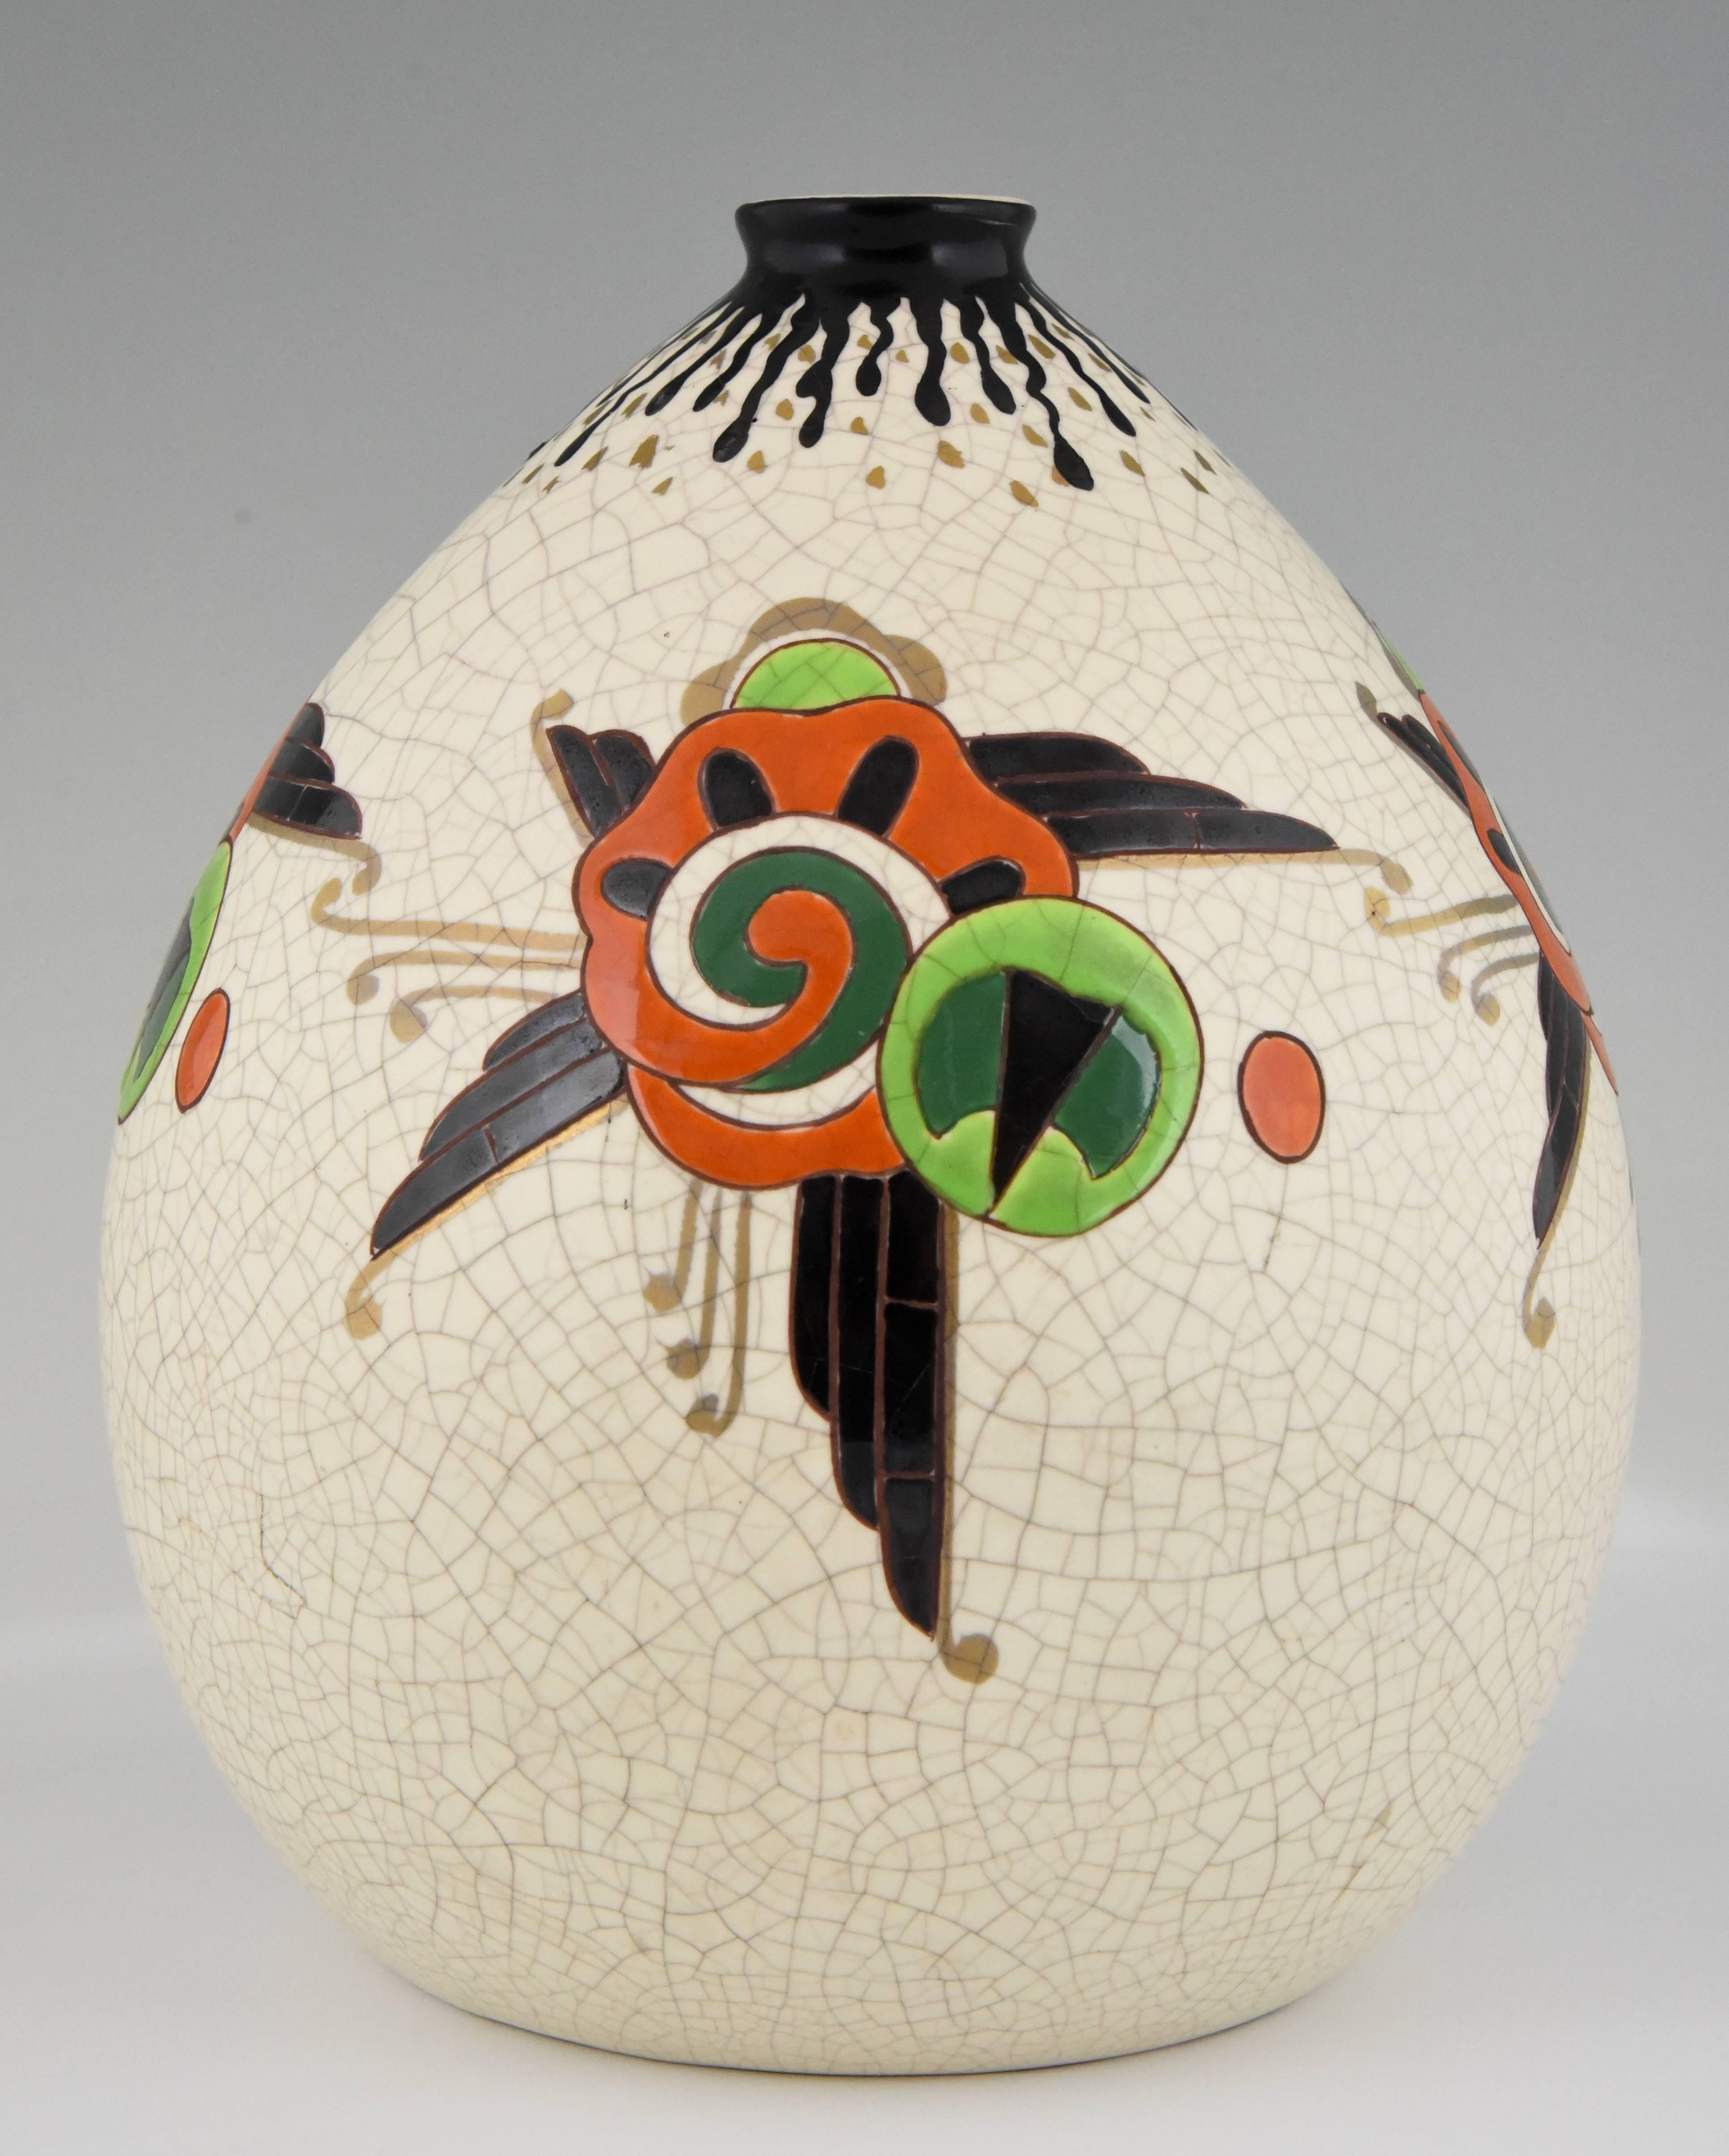 Mid-20th Century Art Deco Crackle and Enamel Globe Vase Orchies, France, 1930